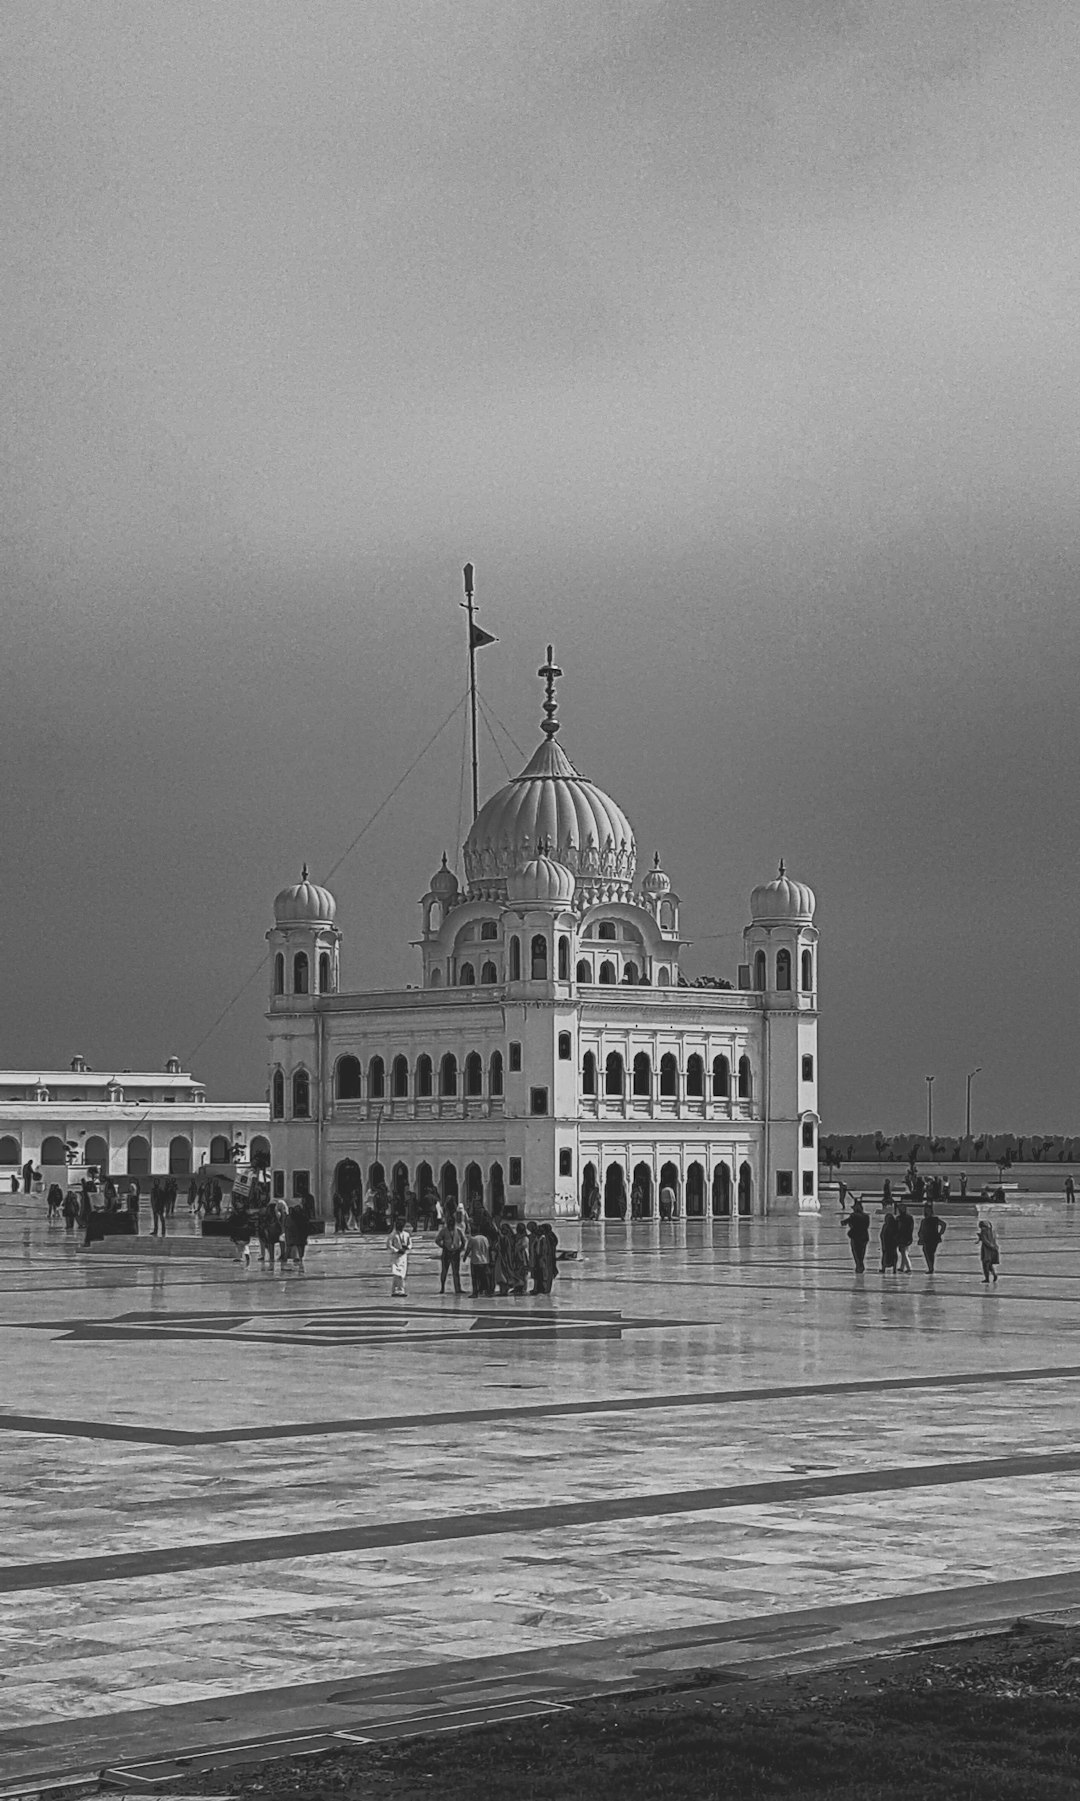 Gurudwara in the middle of sea, people walking around groram style building, black and white, old photo, wide shot, cinematic –ar 19:32